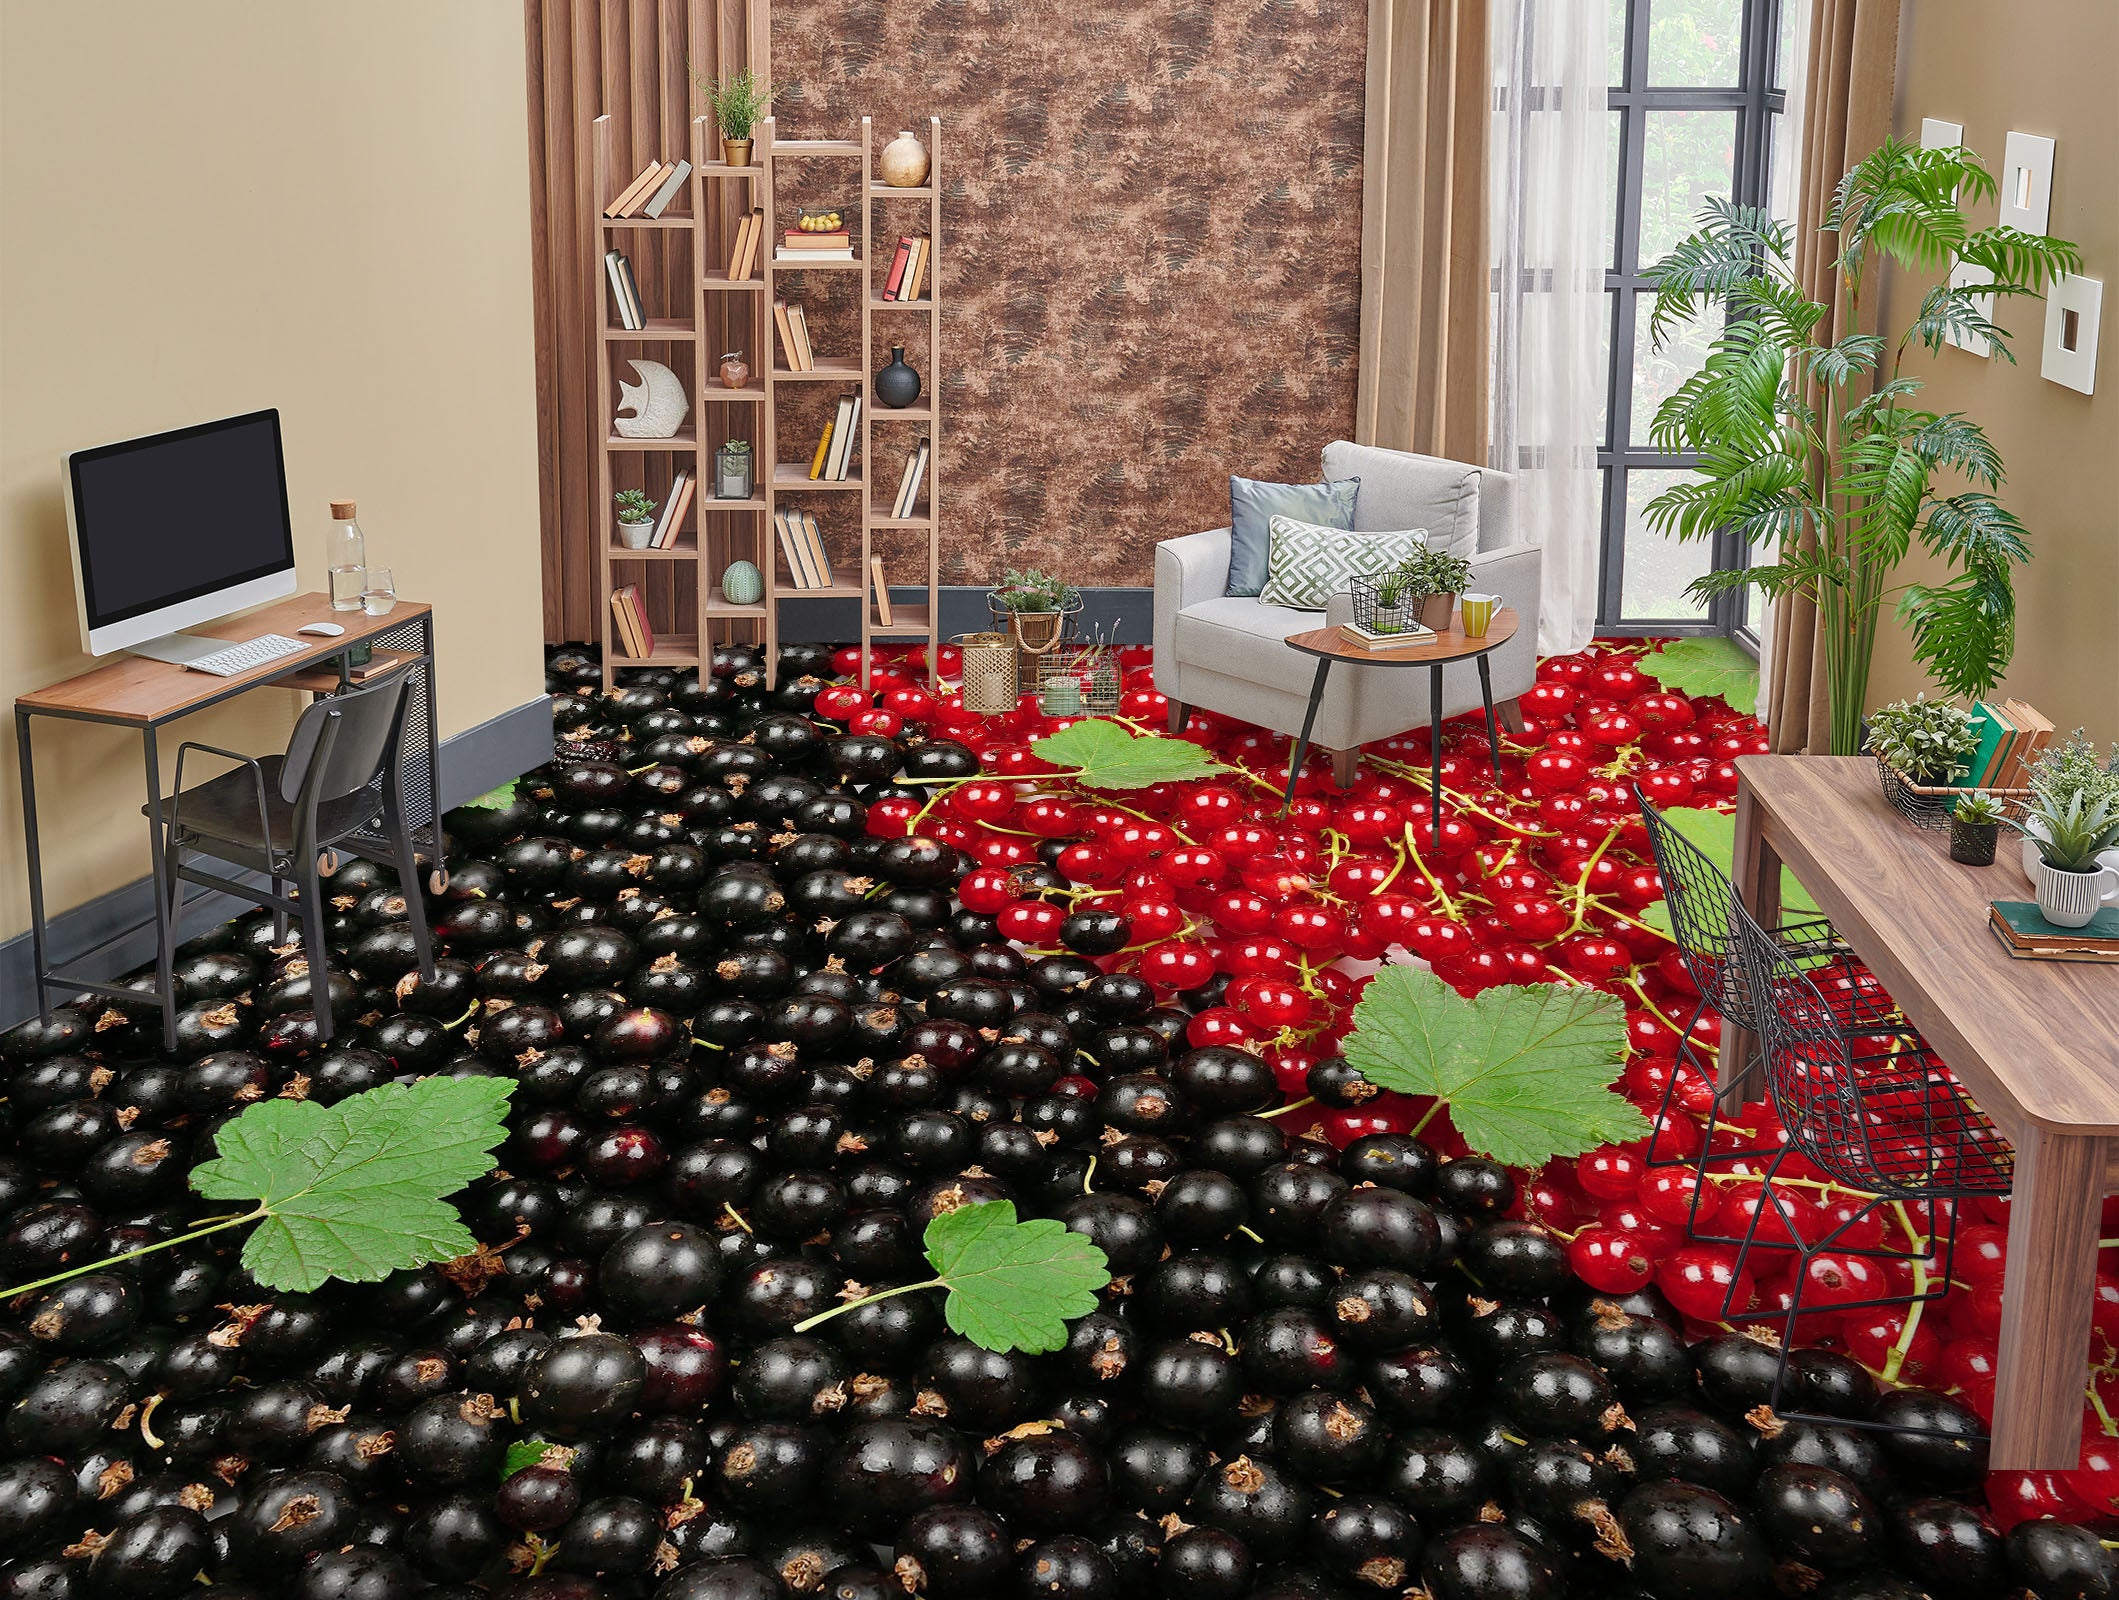 3D Red And Black Cherries 1407 Floor Mural  Wallpaper Murals Self-Adhesive Removable Print Epoxy